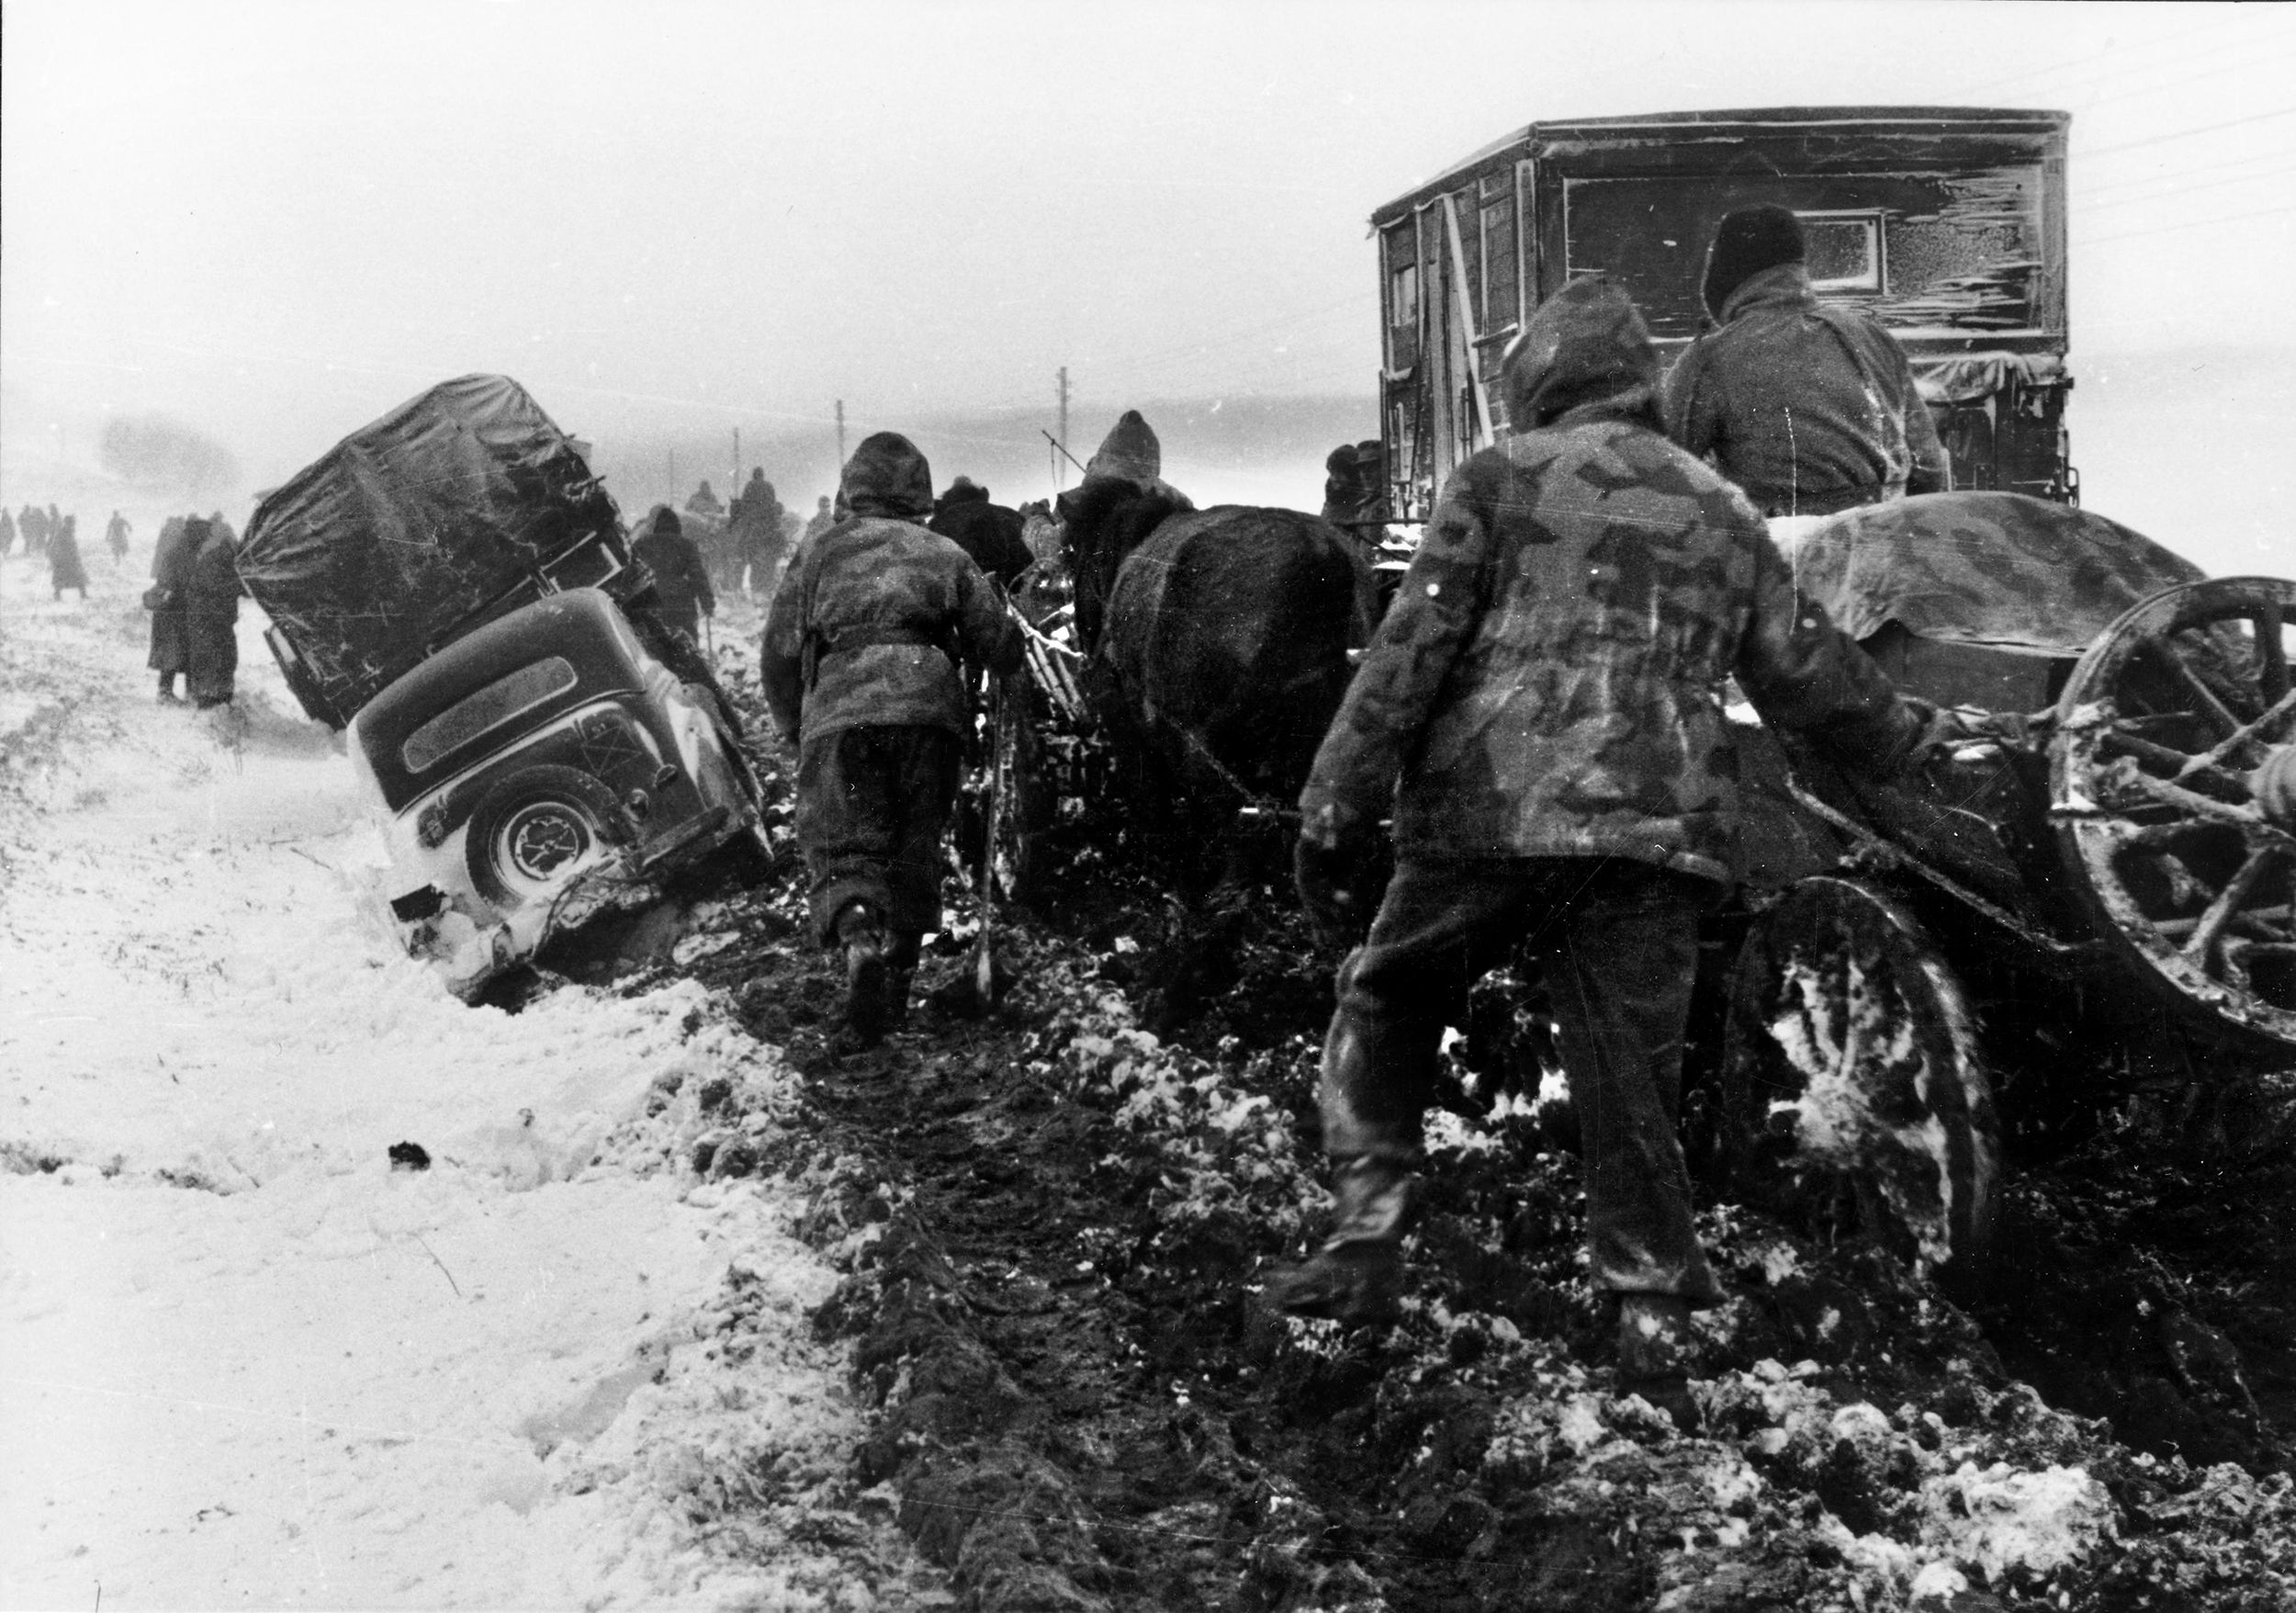 Soldiers with horse and cart retreating in the Ukraine in the winter of 1944. The mud would be a constant problem for both armies. Even tracked vehicles were prone to bogging down, consuming five times the normal amount of fuel. At times, only horses and men marching—sometimes barefoot, having lost their boots in the knee-deep mud—could get through. More of the wounded died during the slow evacuations.